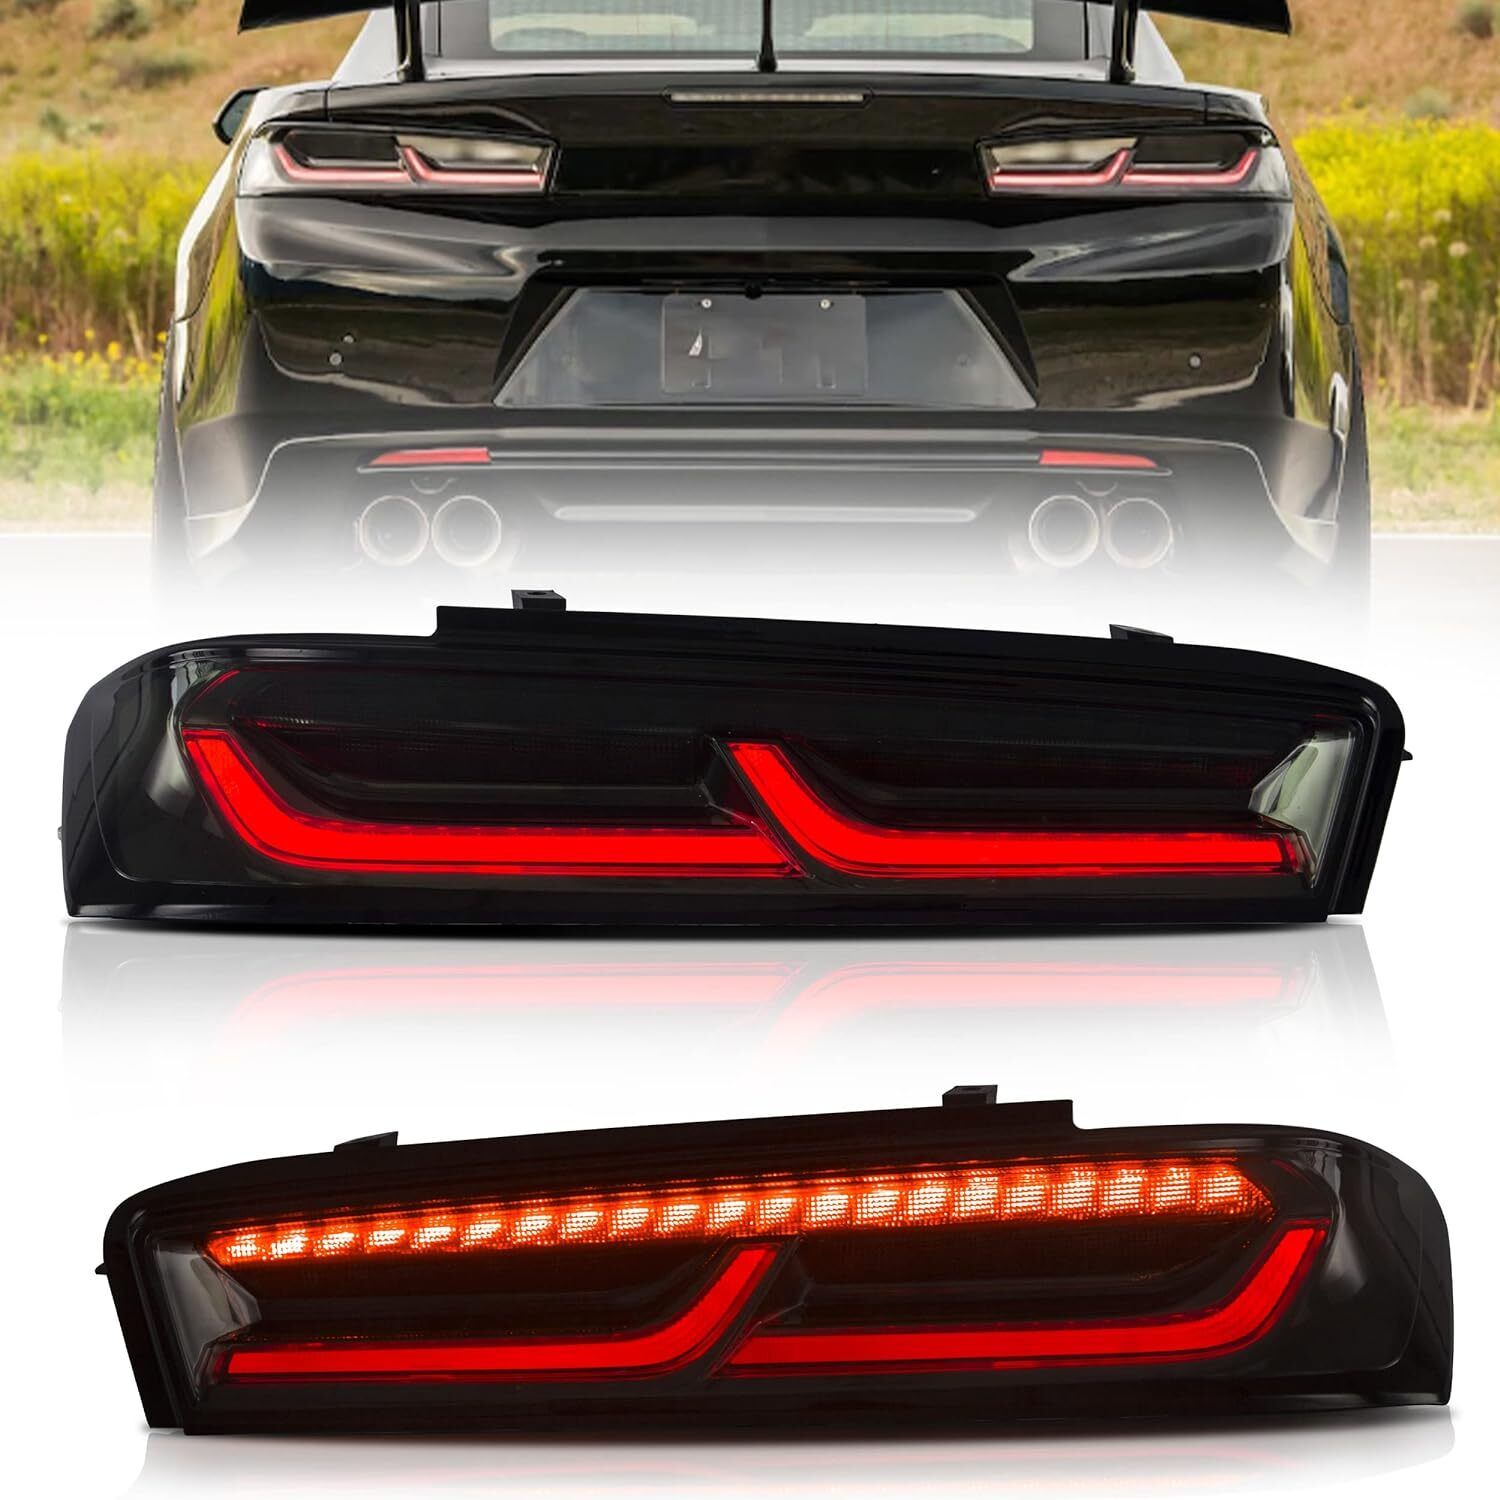 VLAND LED Tail Lights For Chevrolet Chevy Camaro 2016-2018 Red Suquential Signal